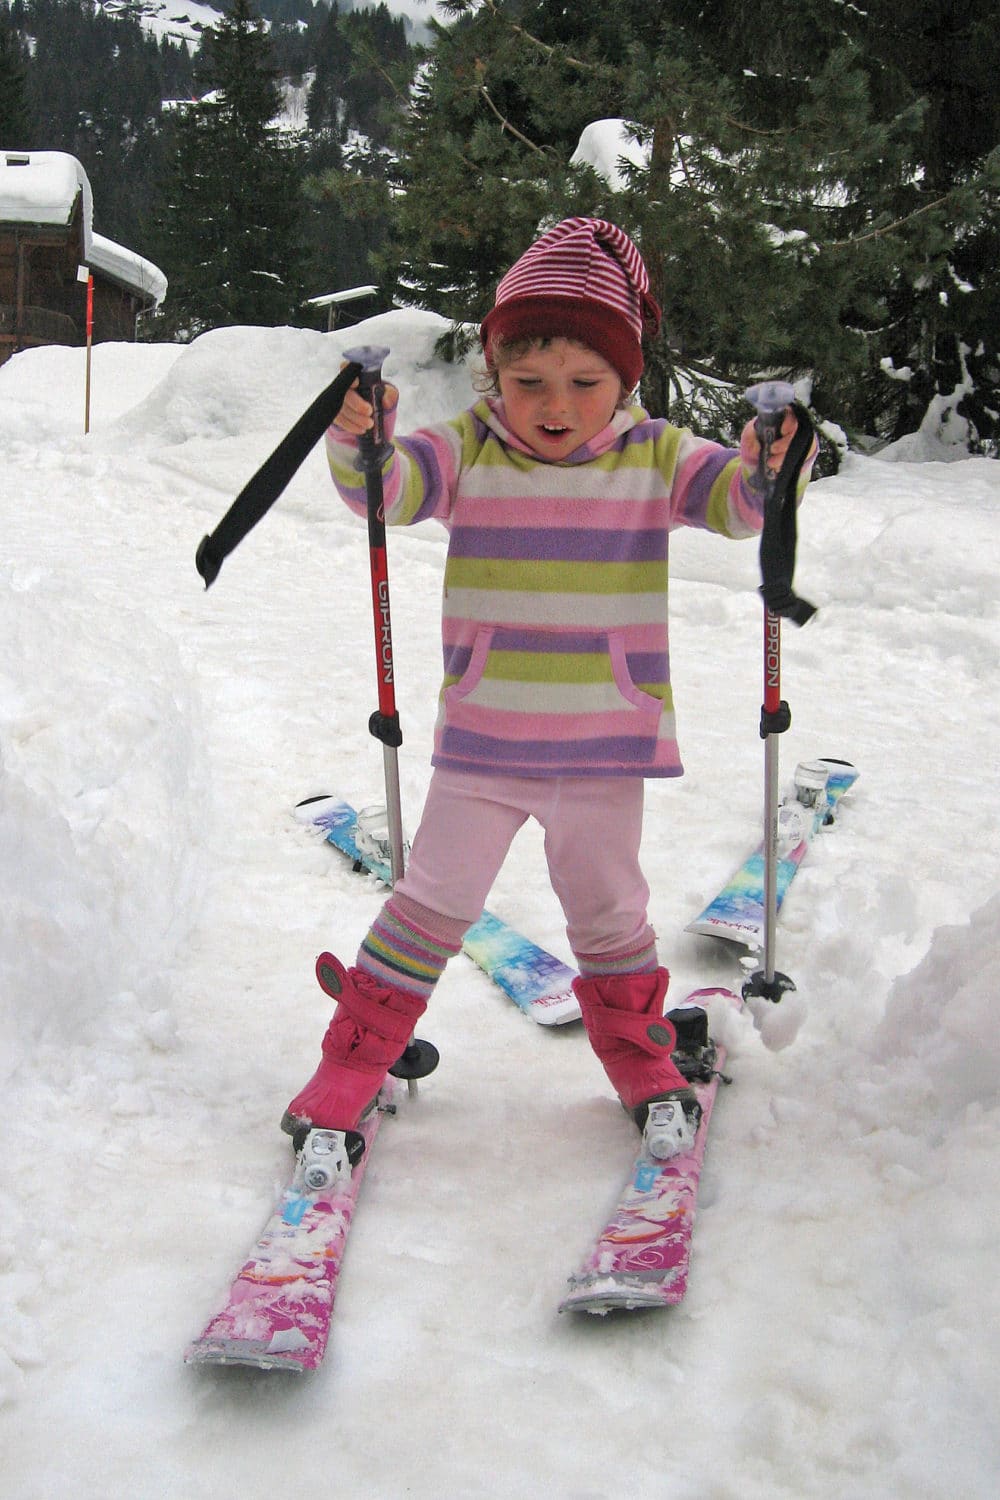 A young child tries to make skis work